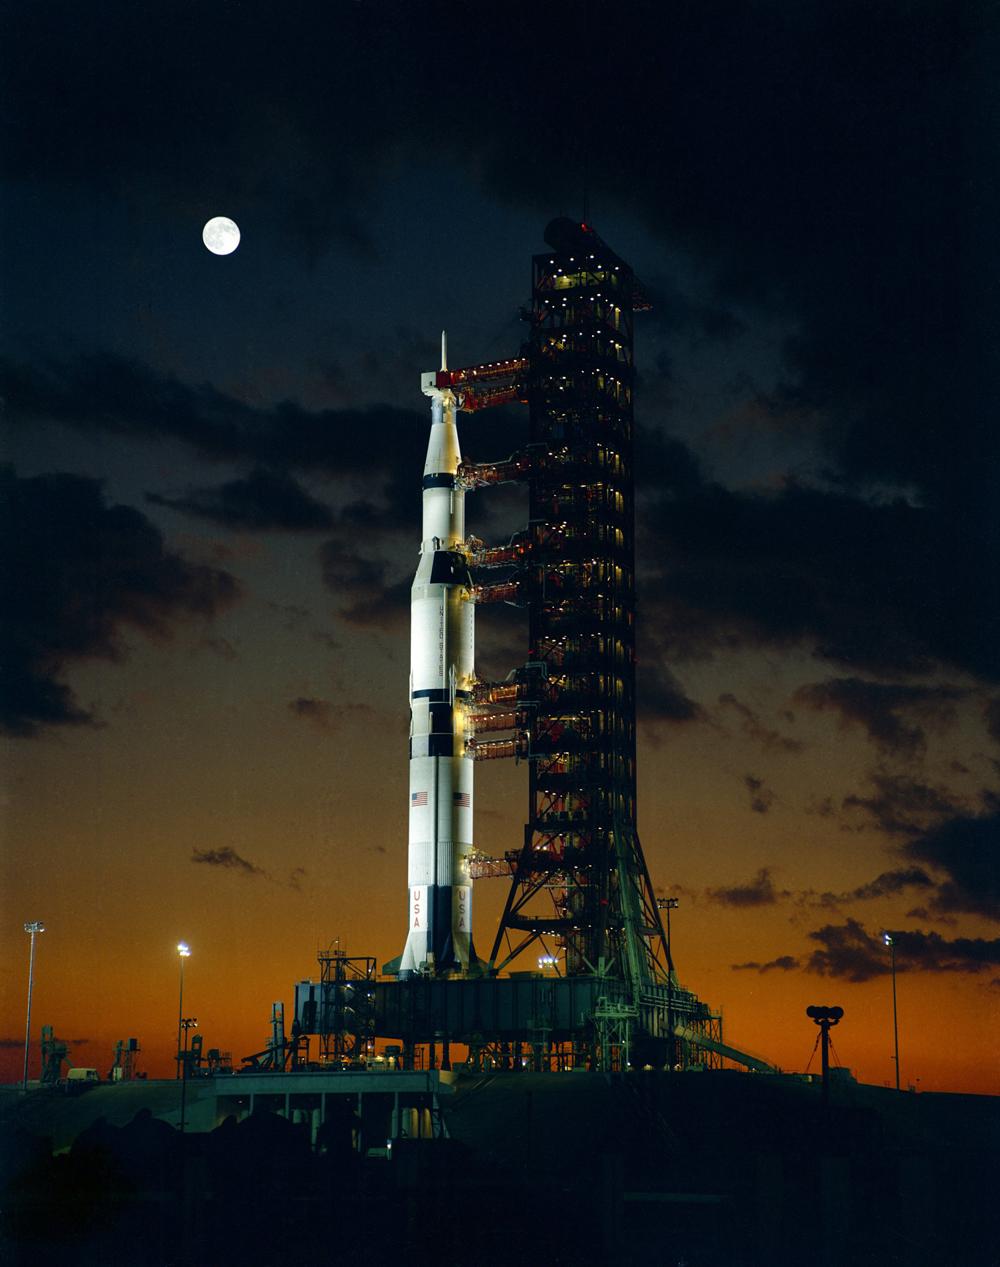 Surprising Facts About NASA’s Mighty Saturn V Moon Rocket